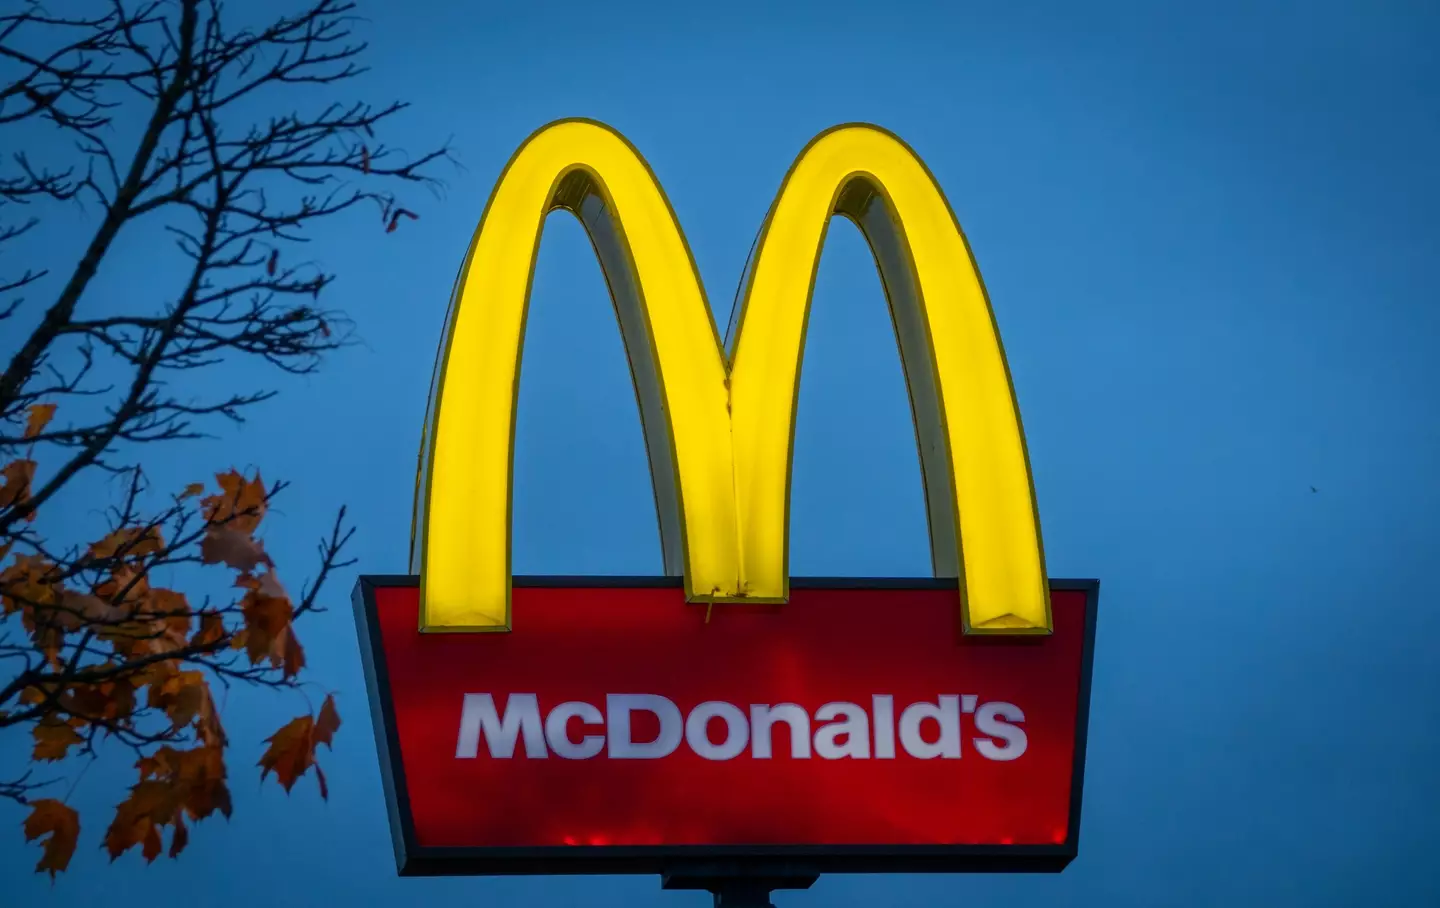 McDonald's said it has resolved the issue in the UK.